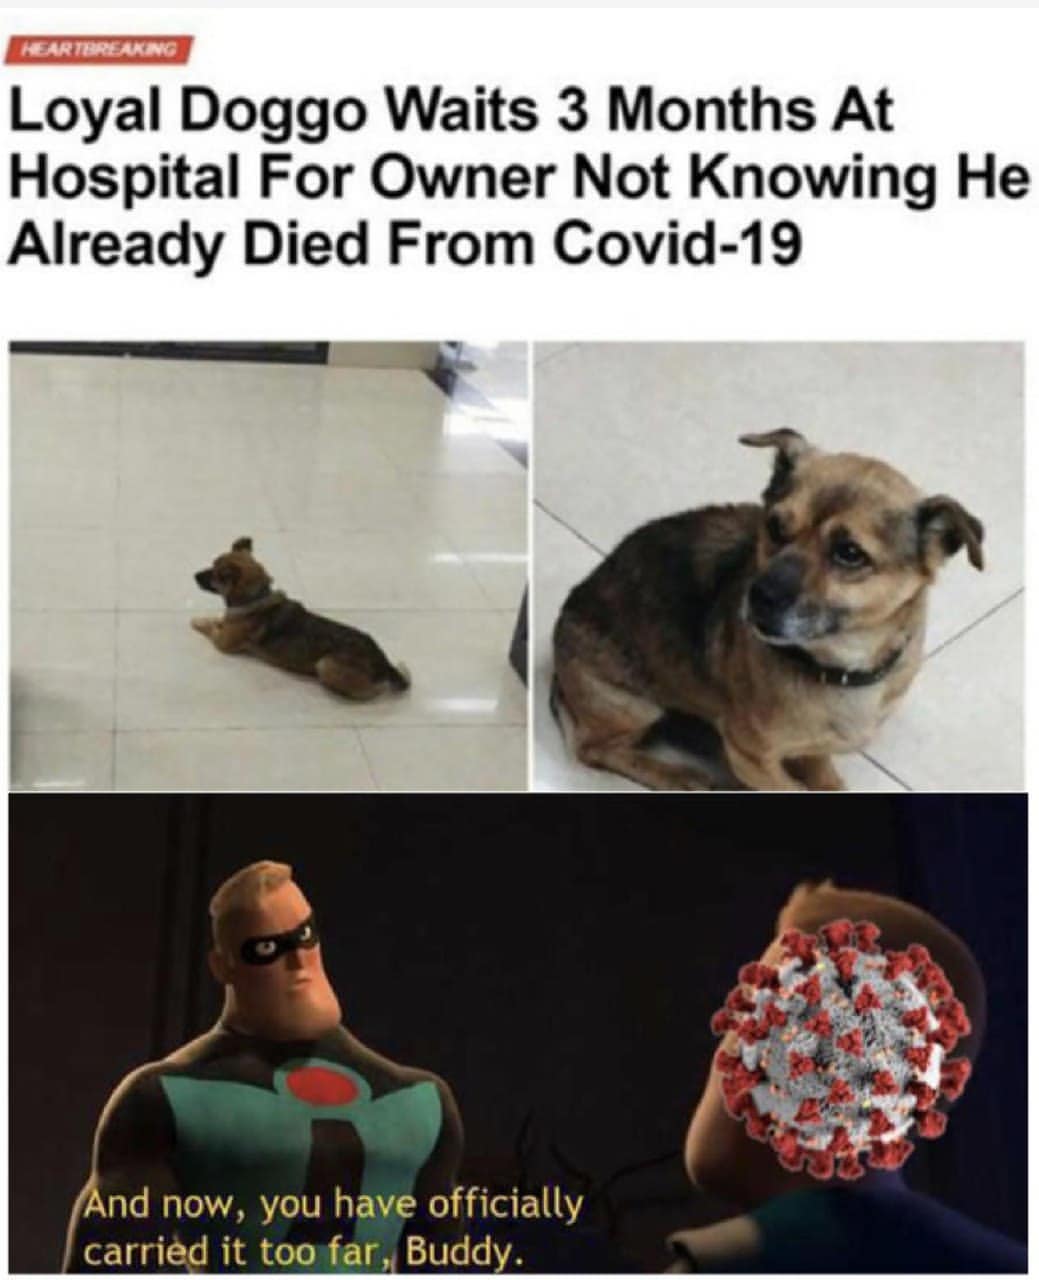 Loyal doggo waits 3 months at hospital for owner not knowing he already died from covid-19. Now, you have officially carried it too far buddy.